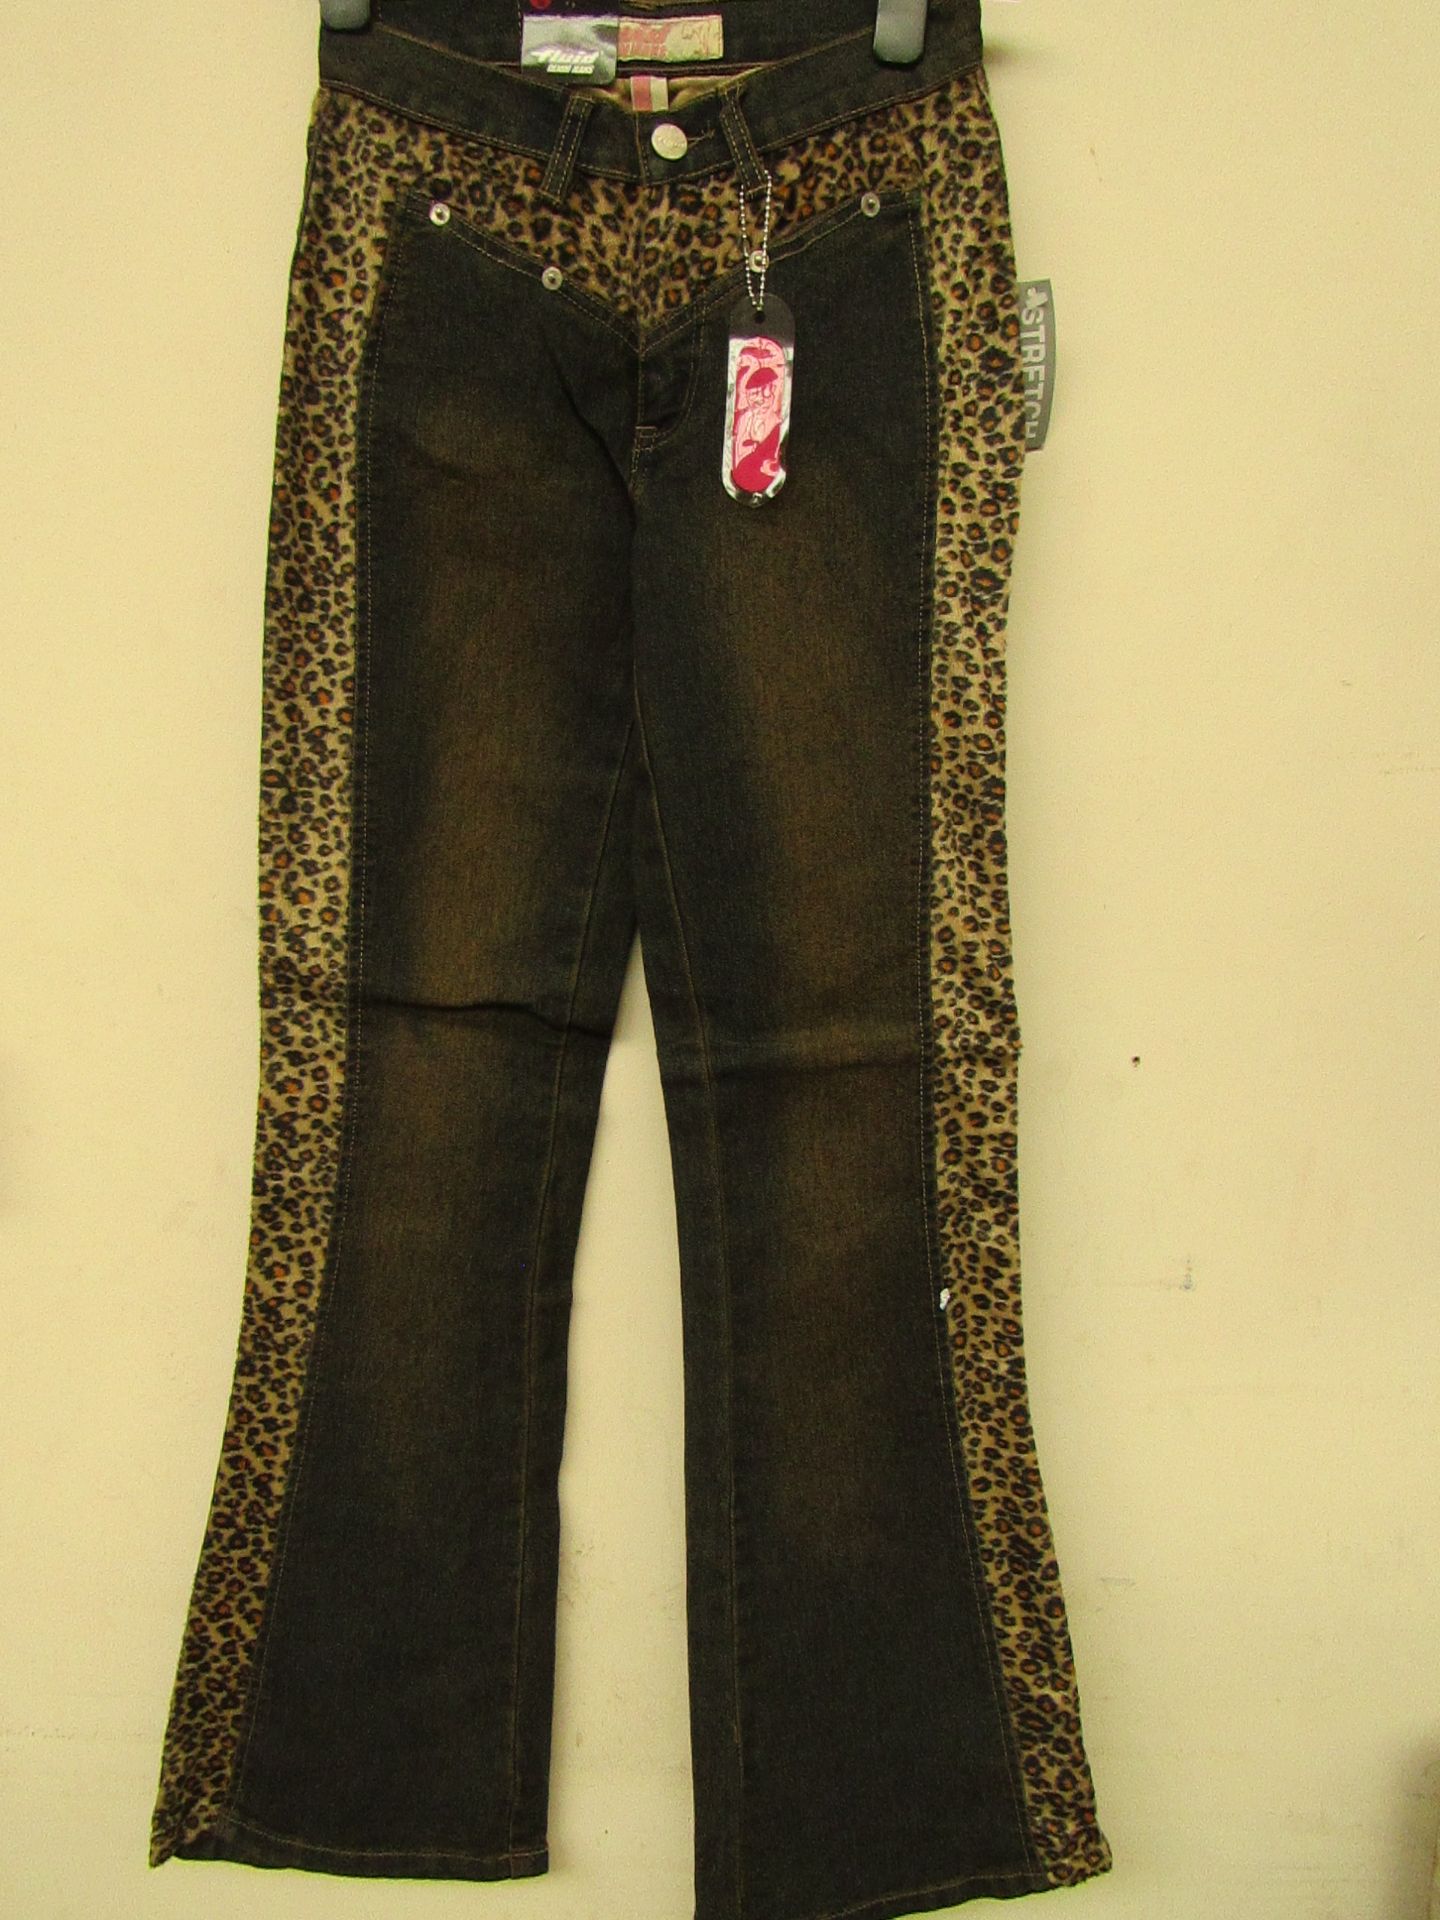 9 Pairs of girls stretch jeans with lepoard print design,various sizes range from 7yrs to 13 yrs,all